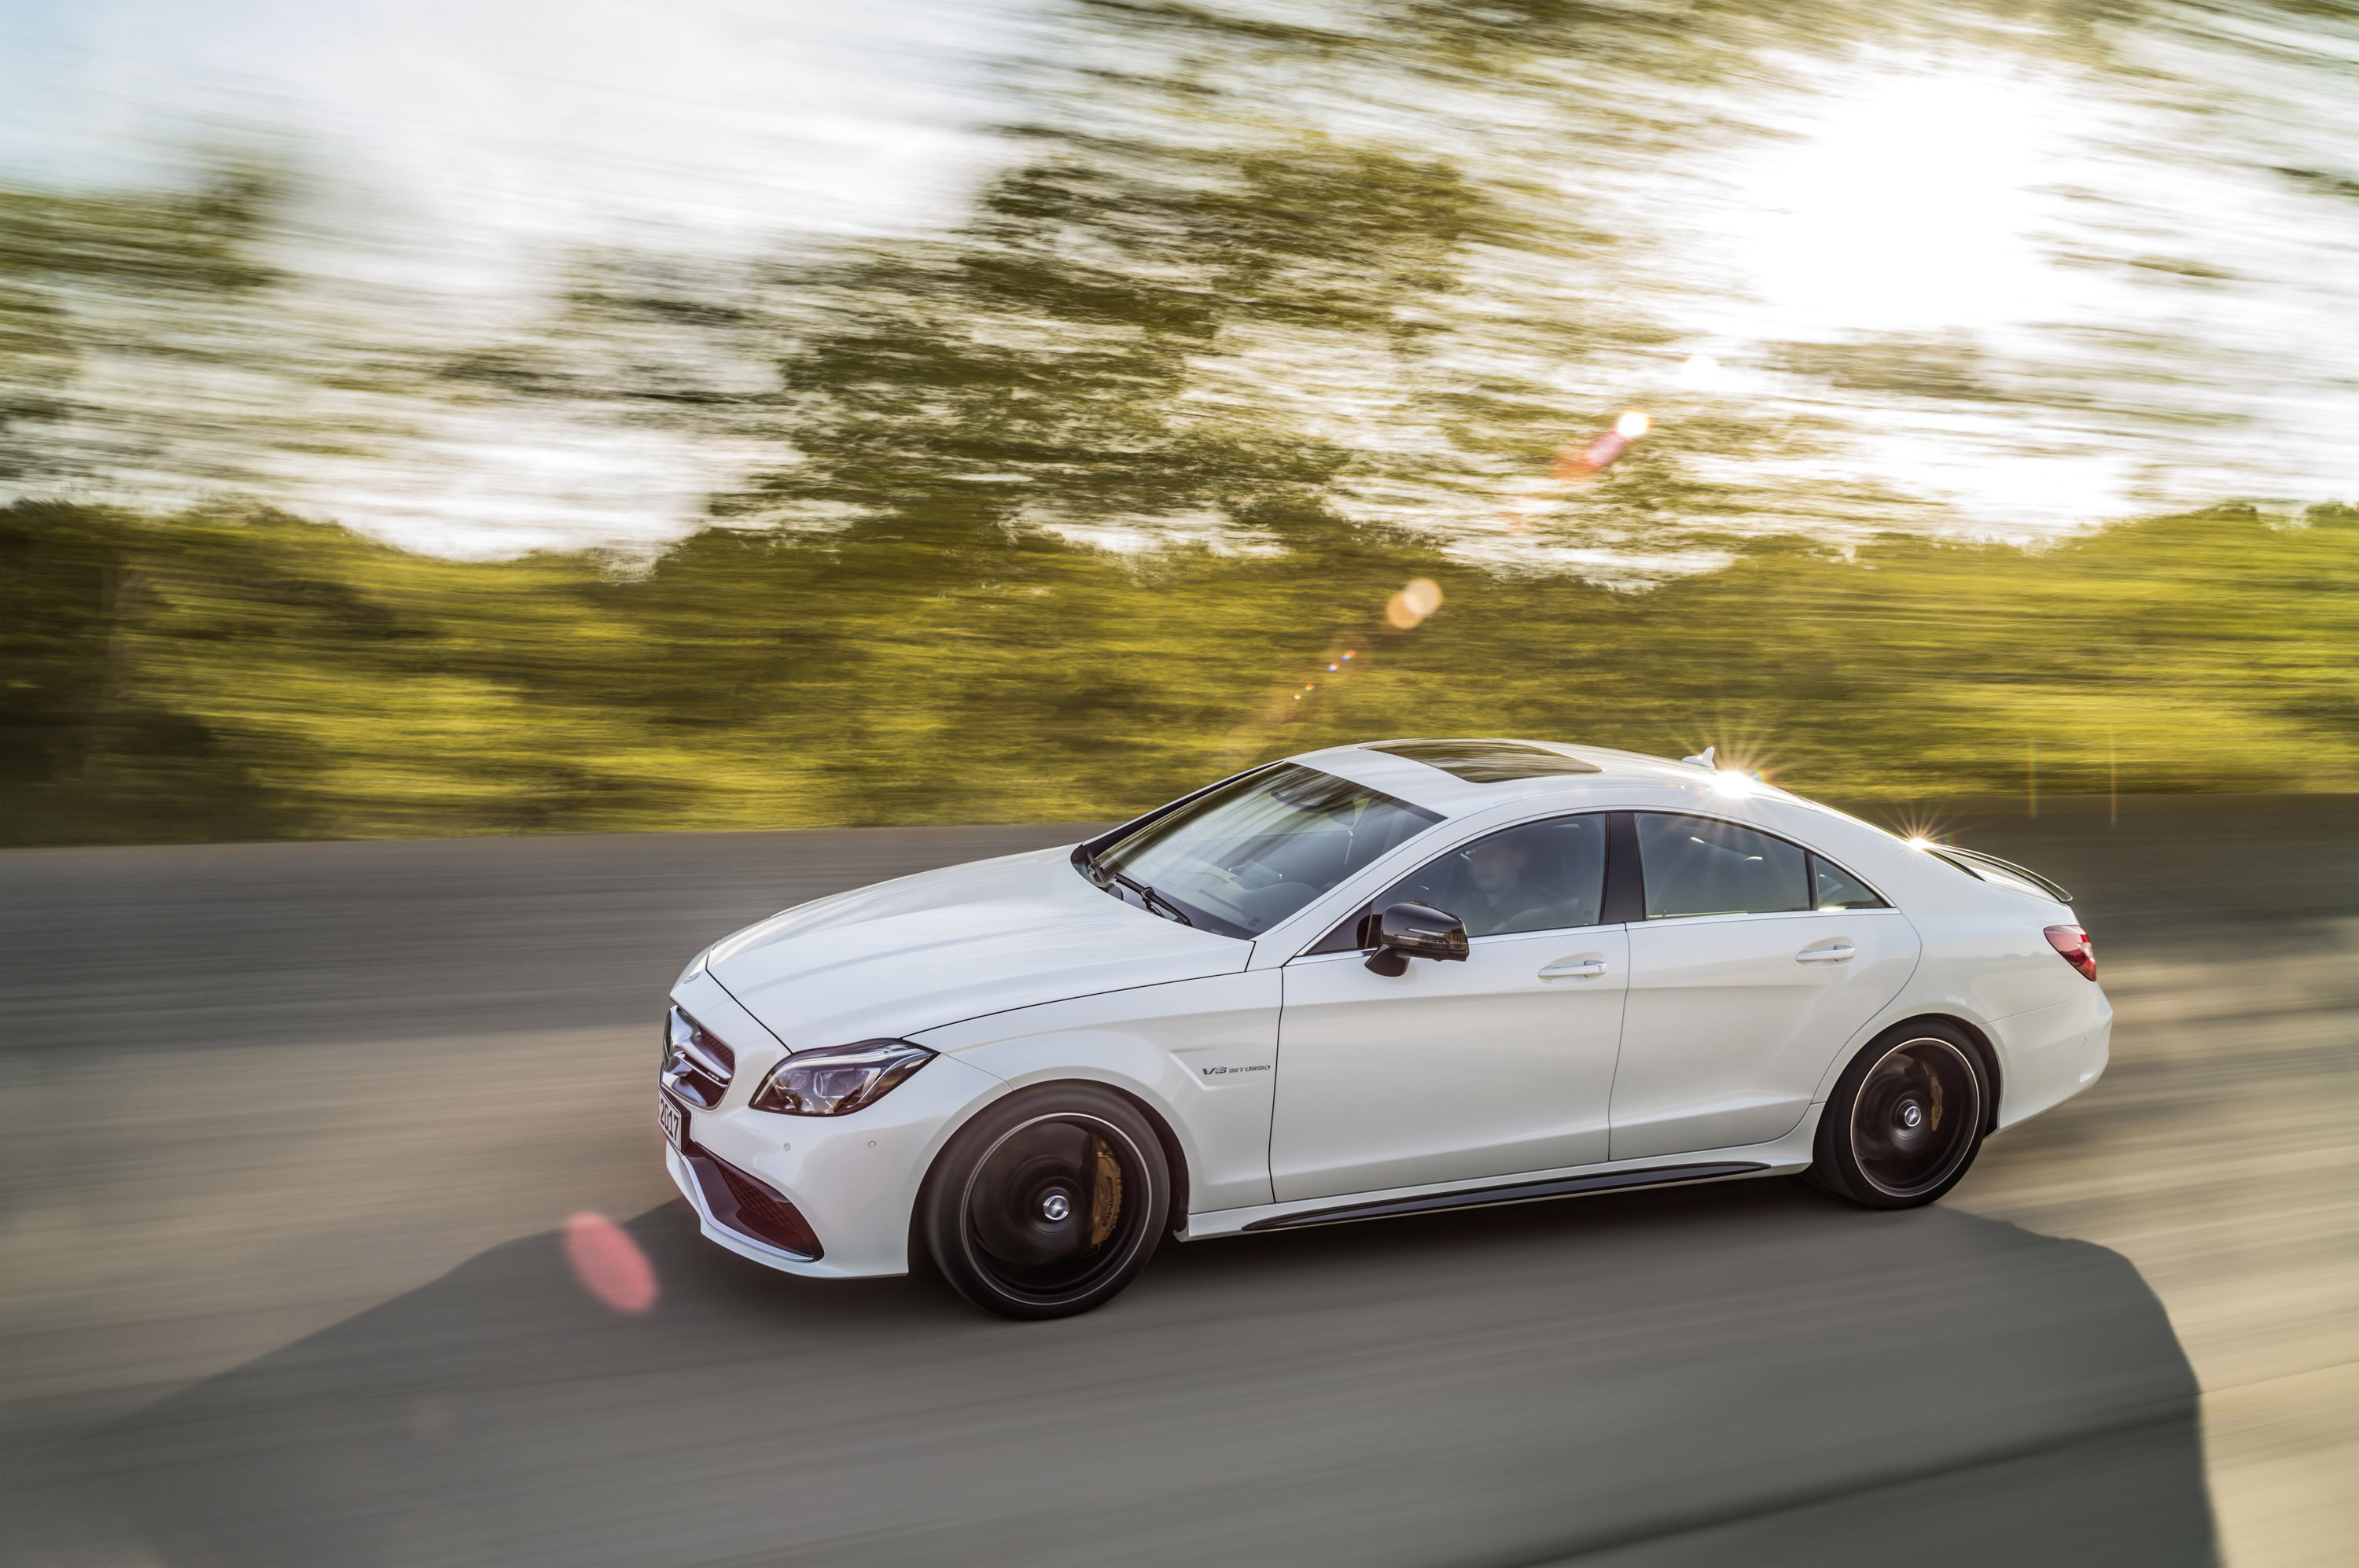 Mercedes-Benz CLS and CLS Shooting Brake